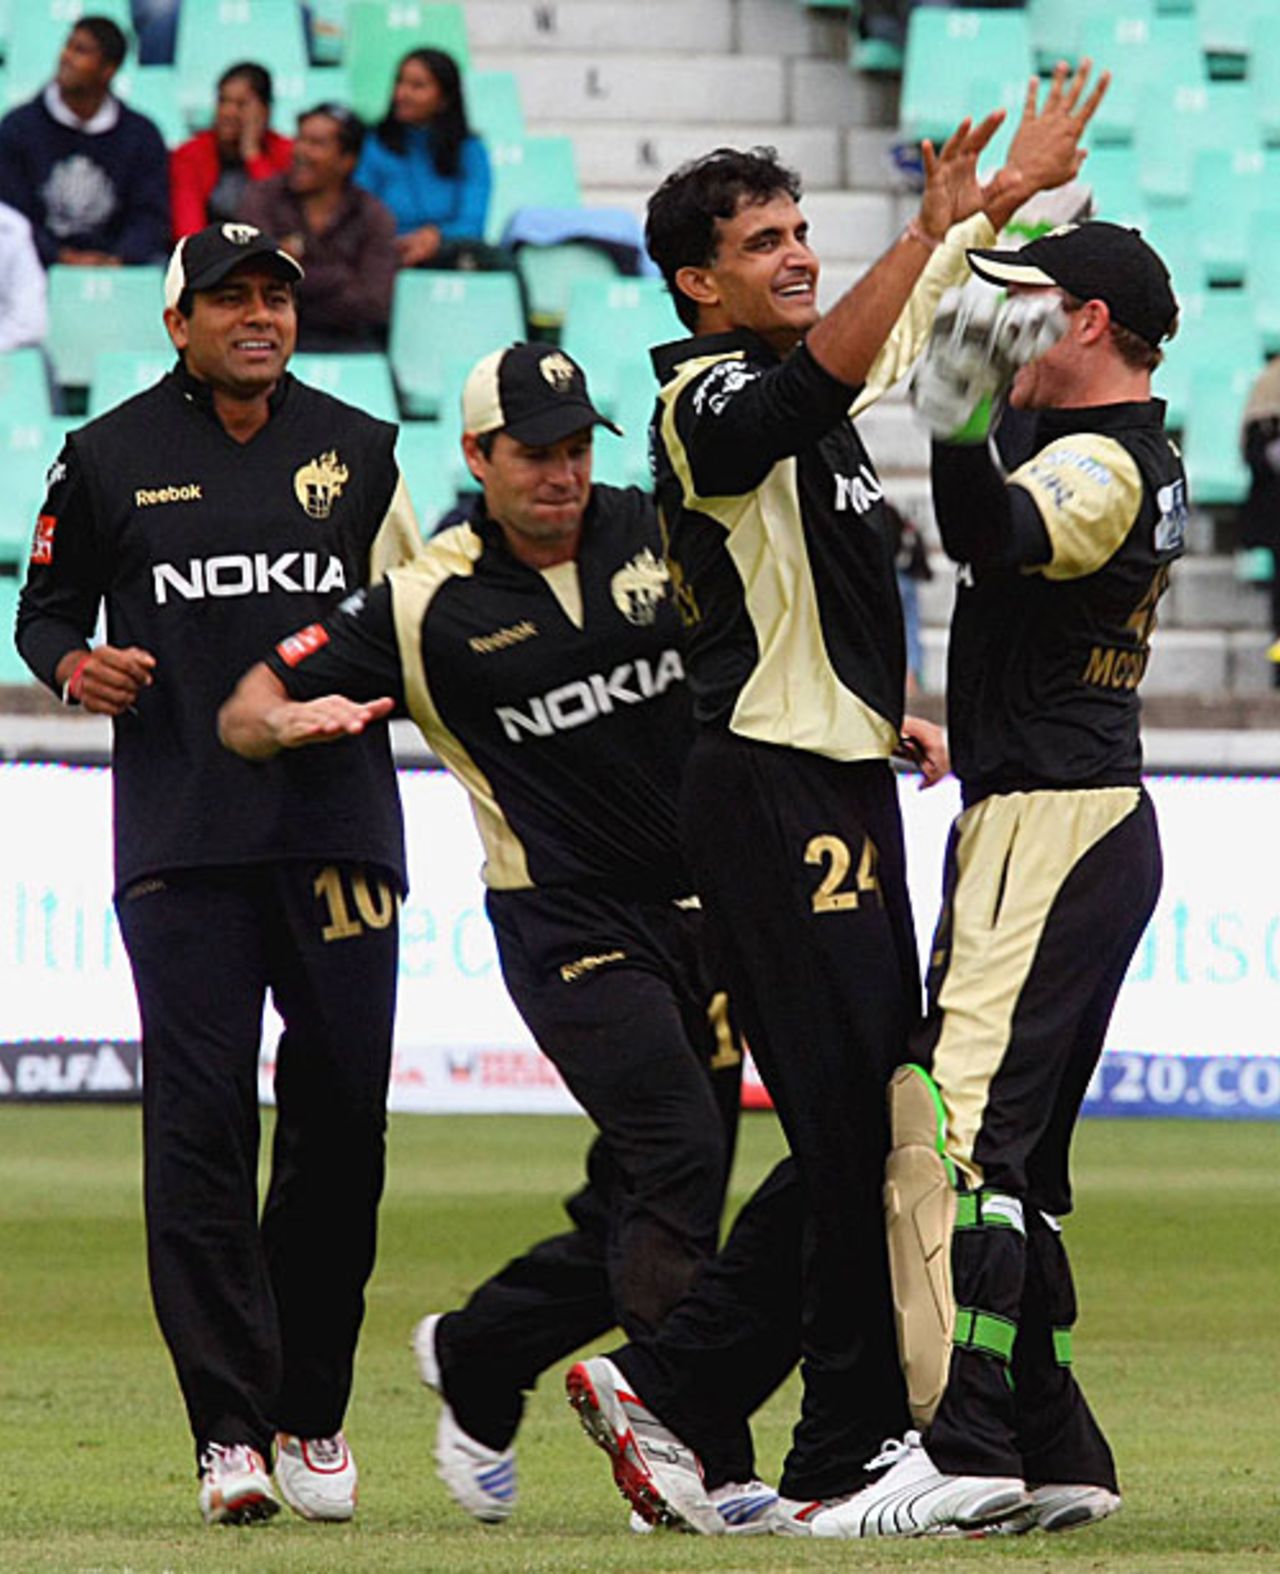 Sourav Ganguly took two wickets in his first over, Kings XI Punjab v Kolkata Knight Riders, IPL, 6th game, Durban, April 21, 2009